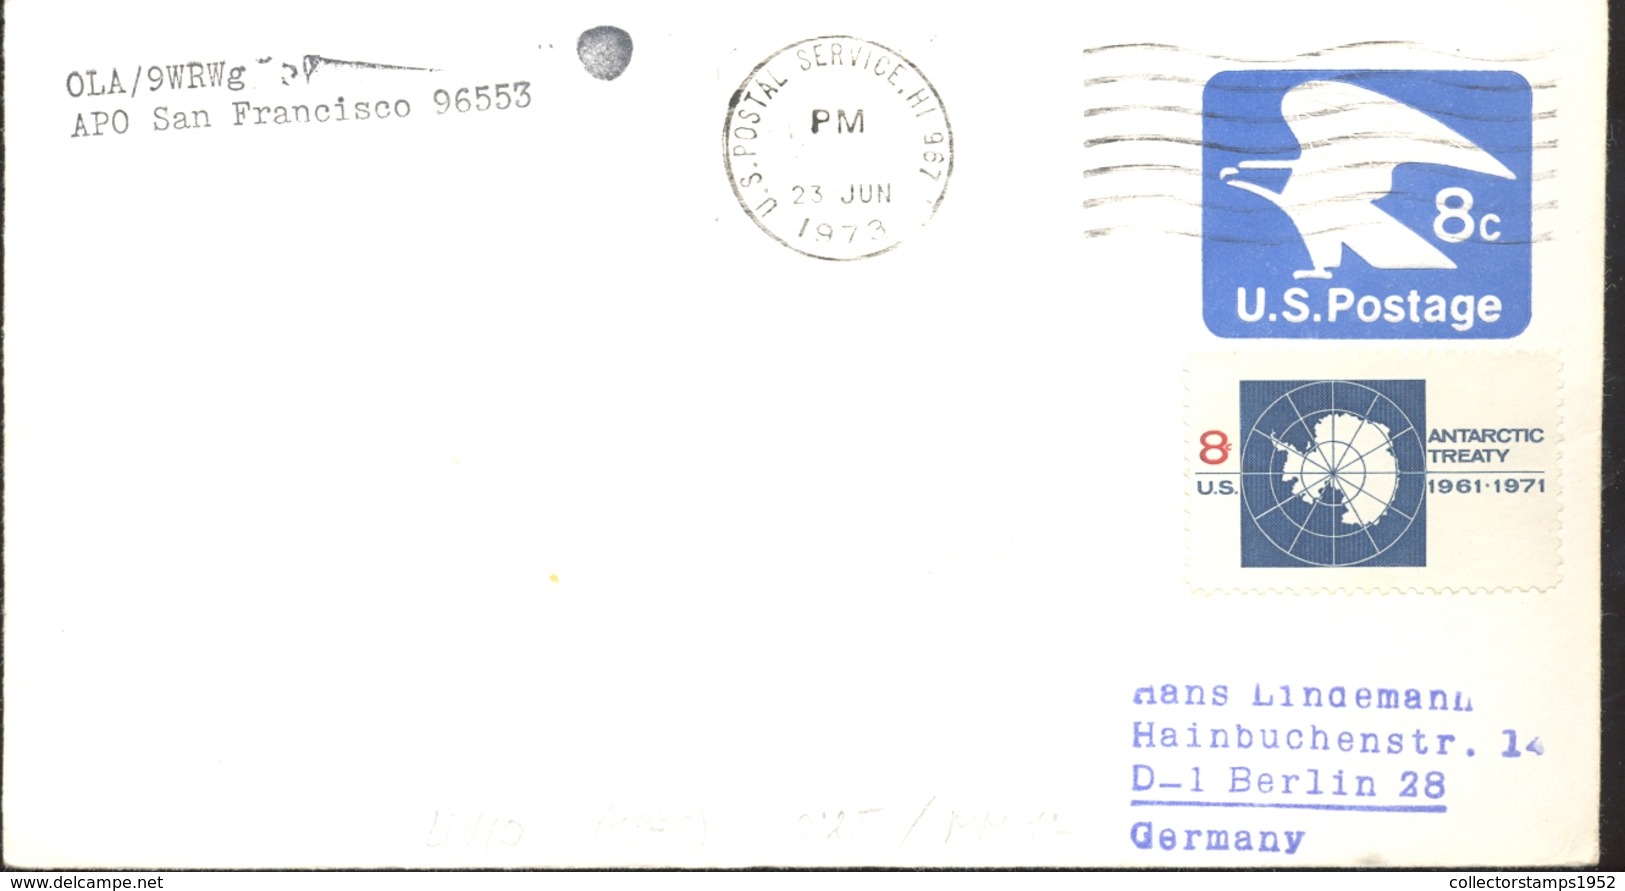 74312- ANTARCTIC TREATY, SOUTH POLE STAMP, EAGLE EMBOISED COVER STATIONERY, 1973, USA - Antarctisch Verdrag